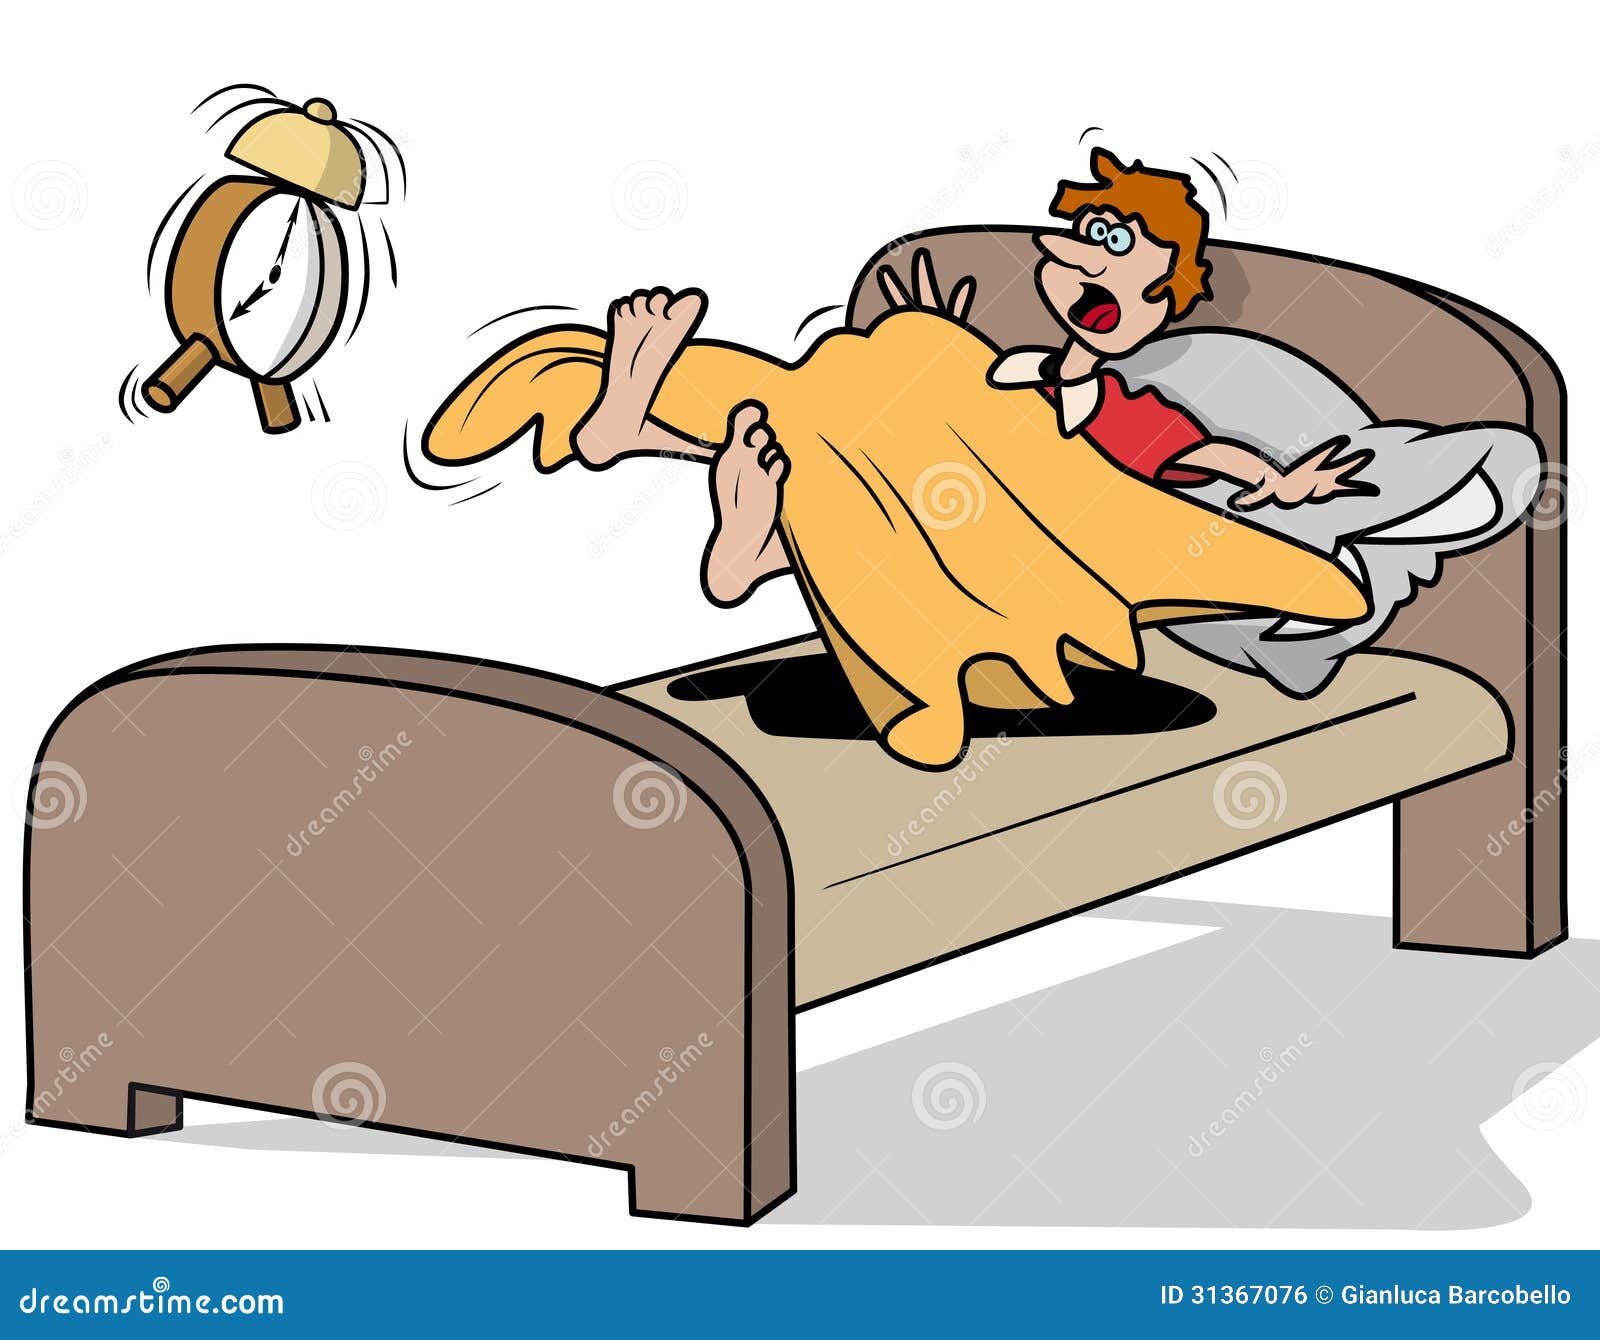 girl making bed clipart - photo #39